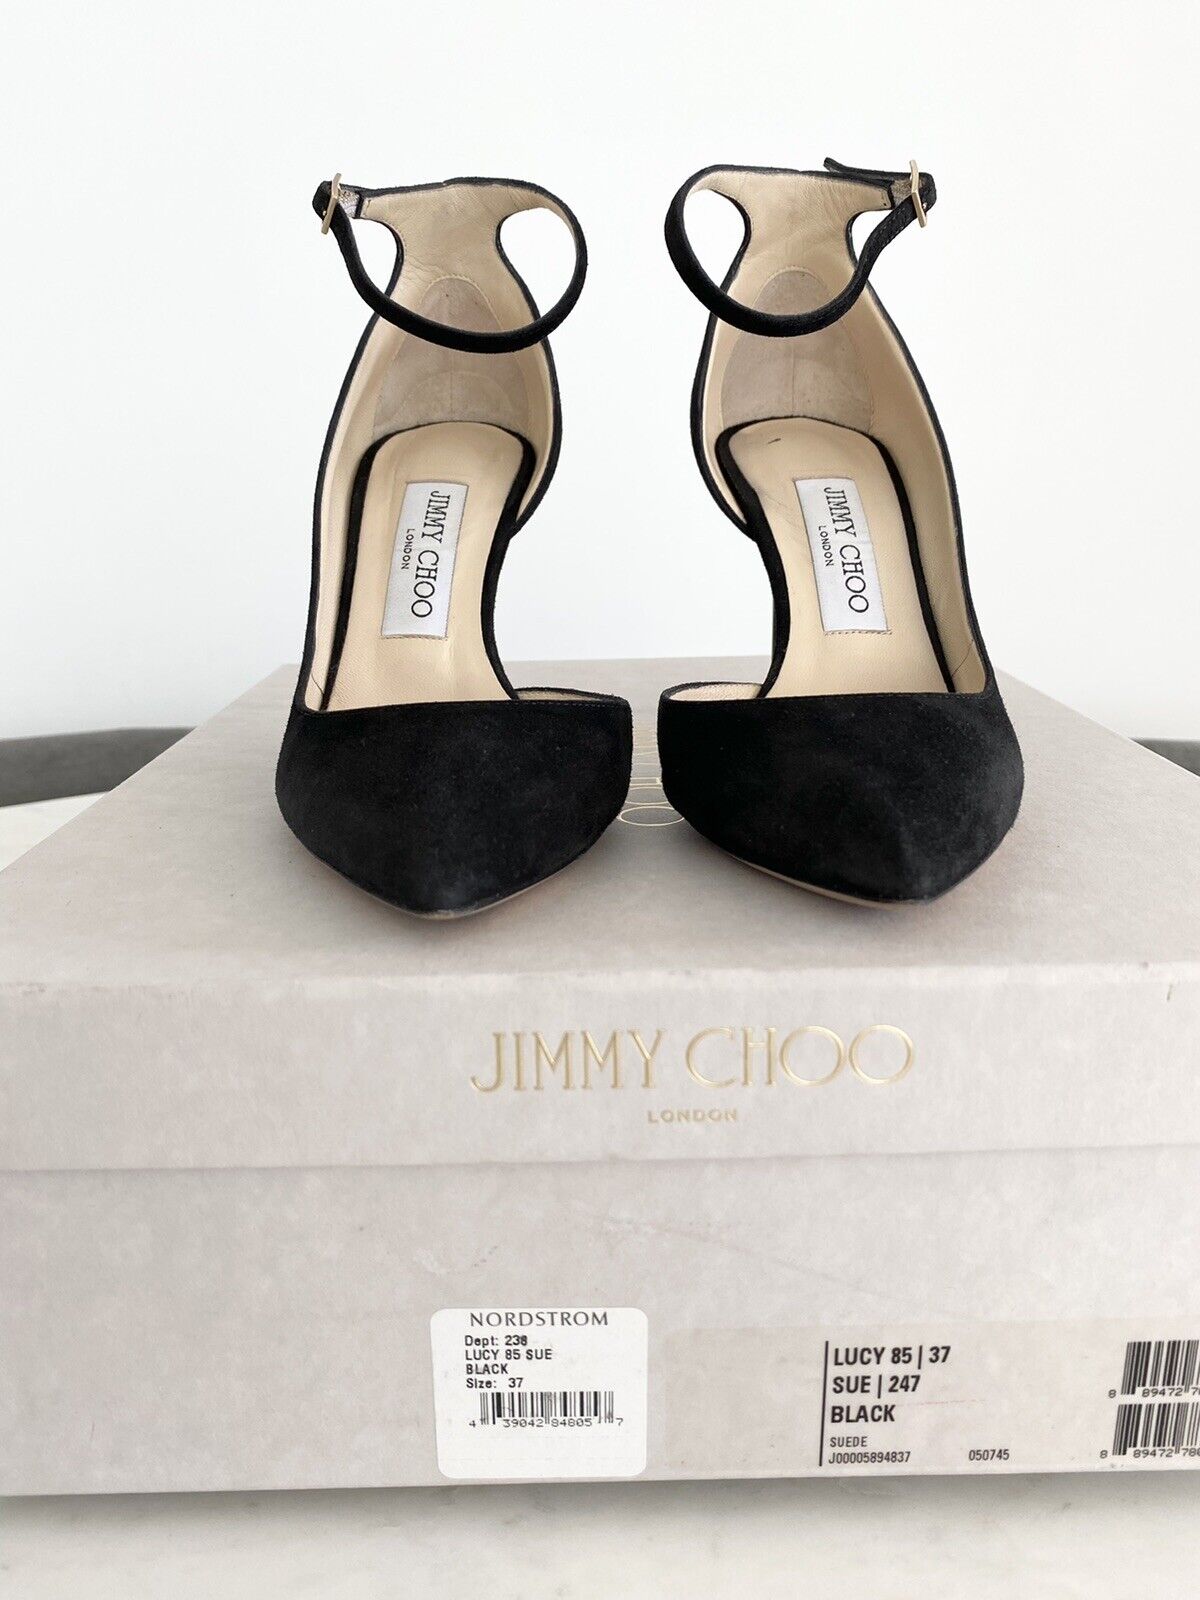 Jimmy Choo Lucy 85. Size 37 EU. Made In Italy. Black Suede. Box & Receipt